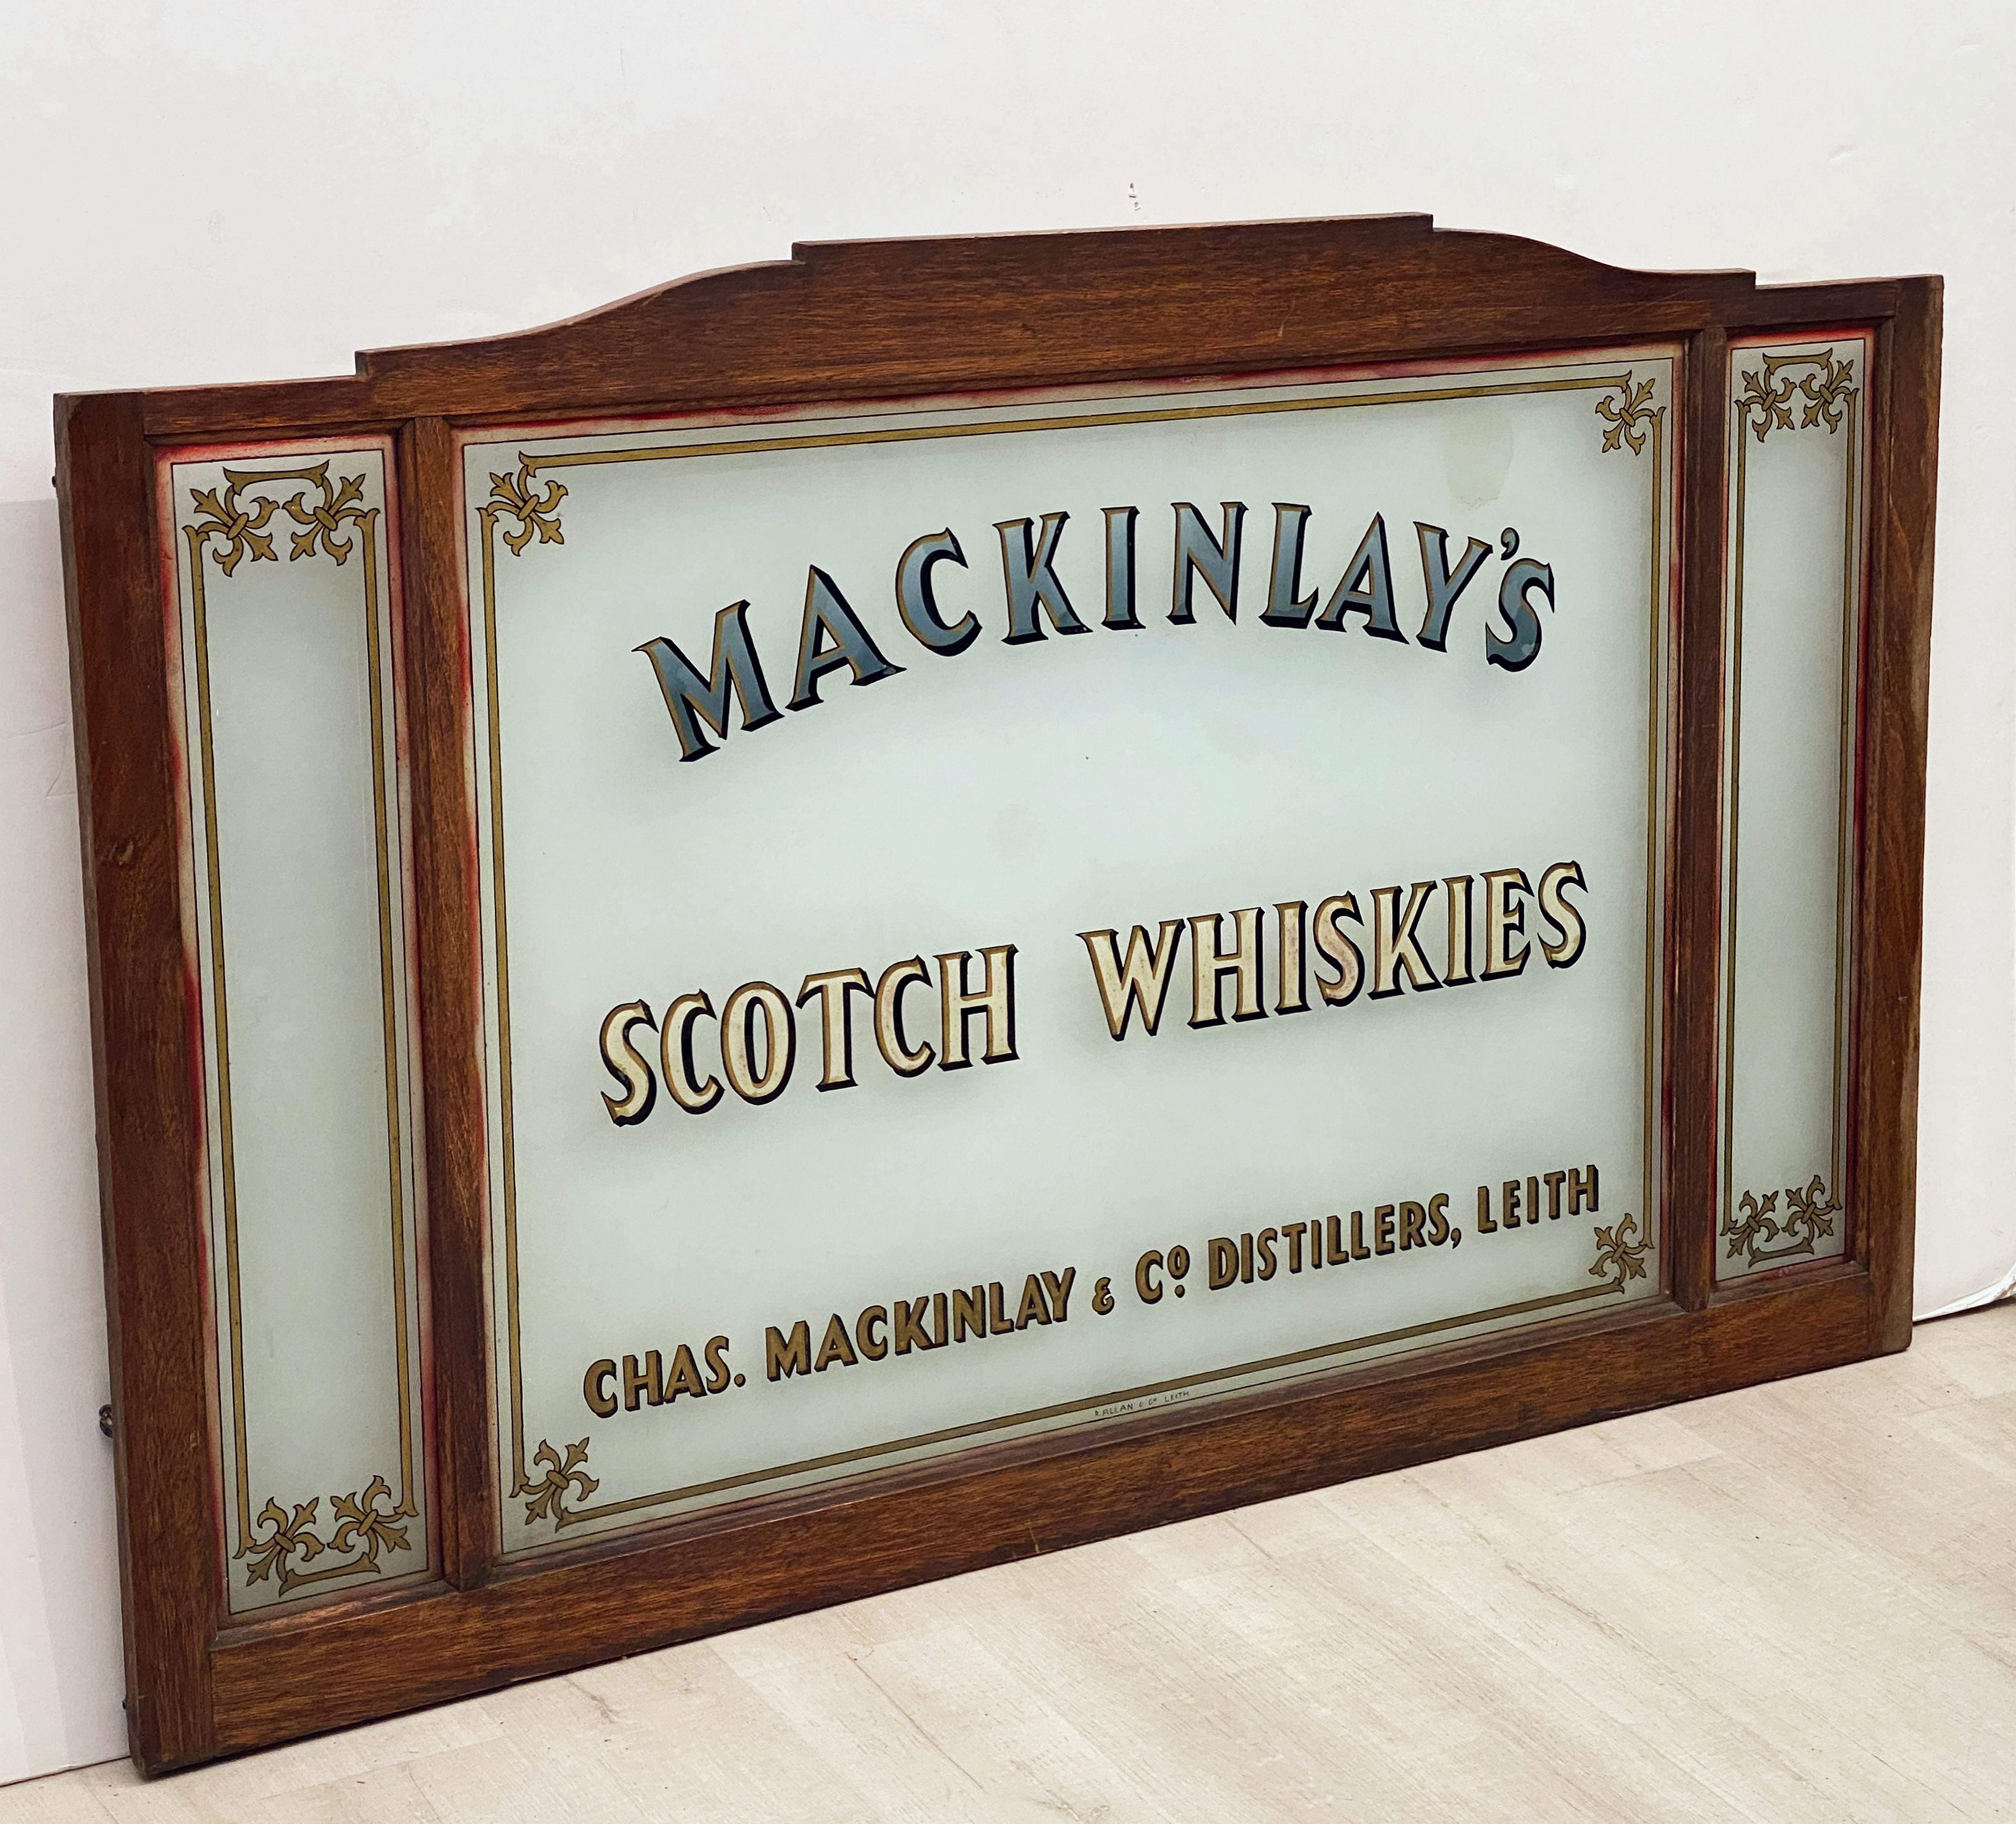 A large rectangular Scottish pub sign panel advertising Mackinlay's Scotch Whiskies by Chas. Mackinlay & Co., Distillers, Leith.
Featuring a wood frame with three glass panels in a triptych style, the pub sign was originally used as a room divider